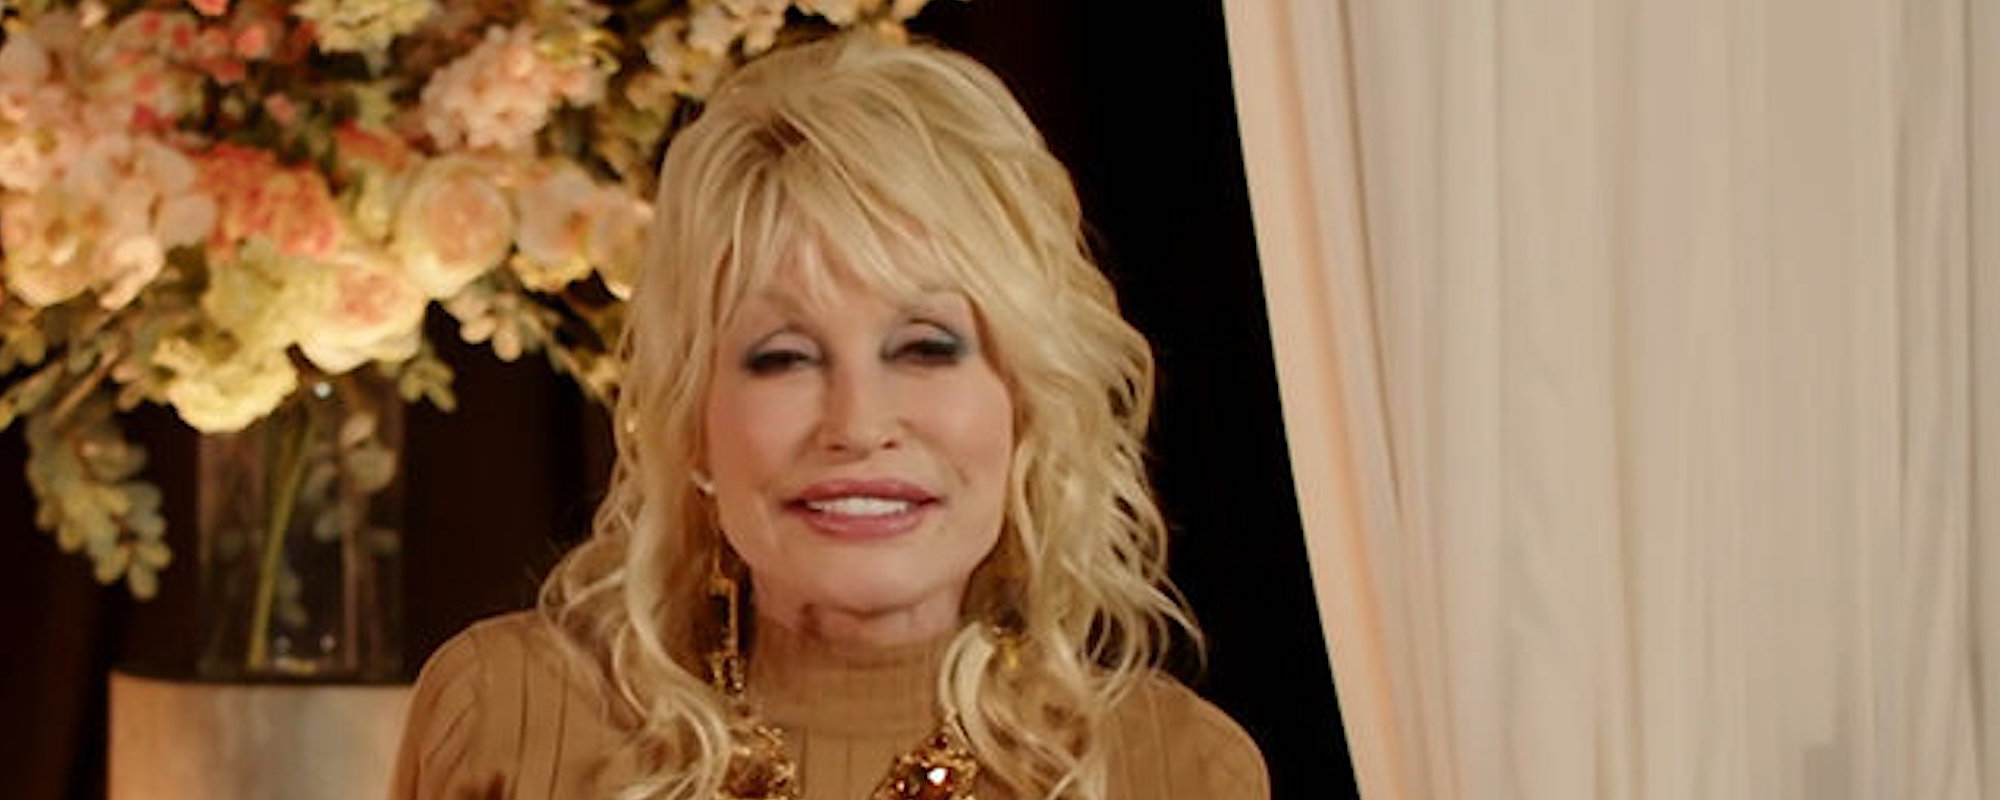 Dolly Parton Vows to Make “Great Rock Album” if Inducted into Rock and Roll Hall of Fame